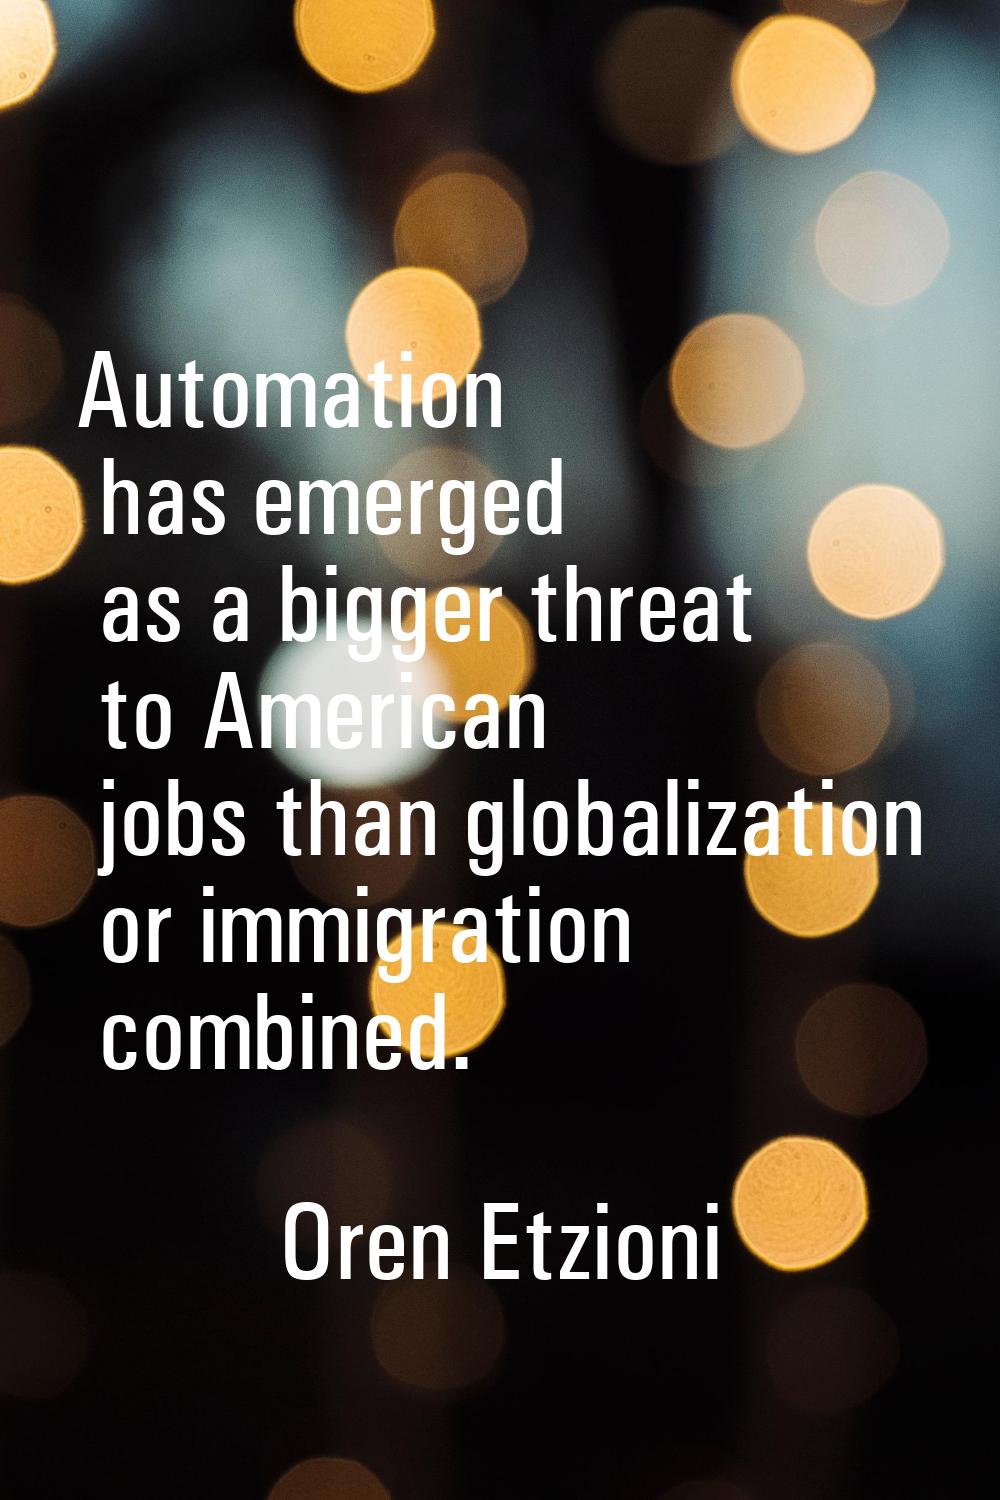 Automation has emerged as a bigger threat to American jobs than globalization or immigration combin